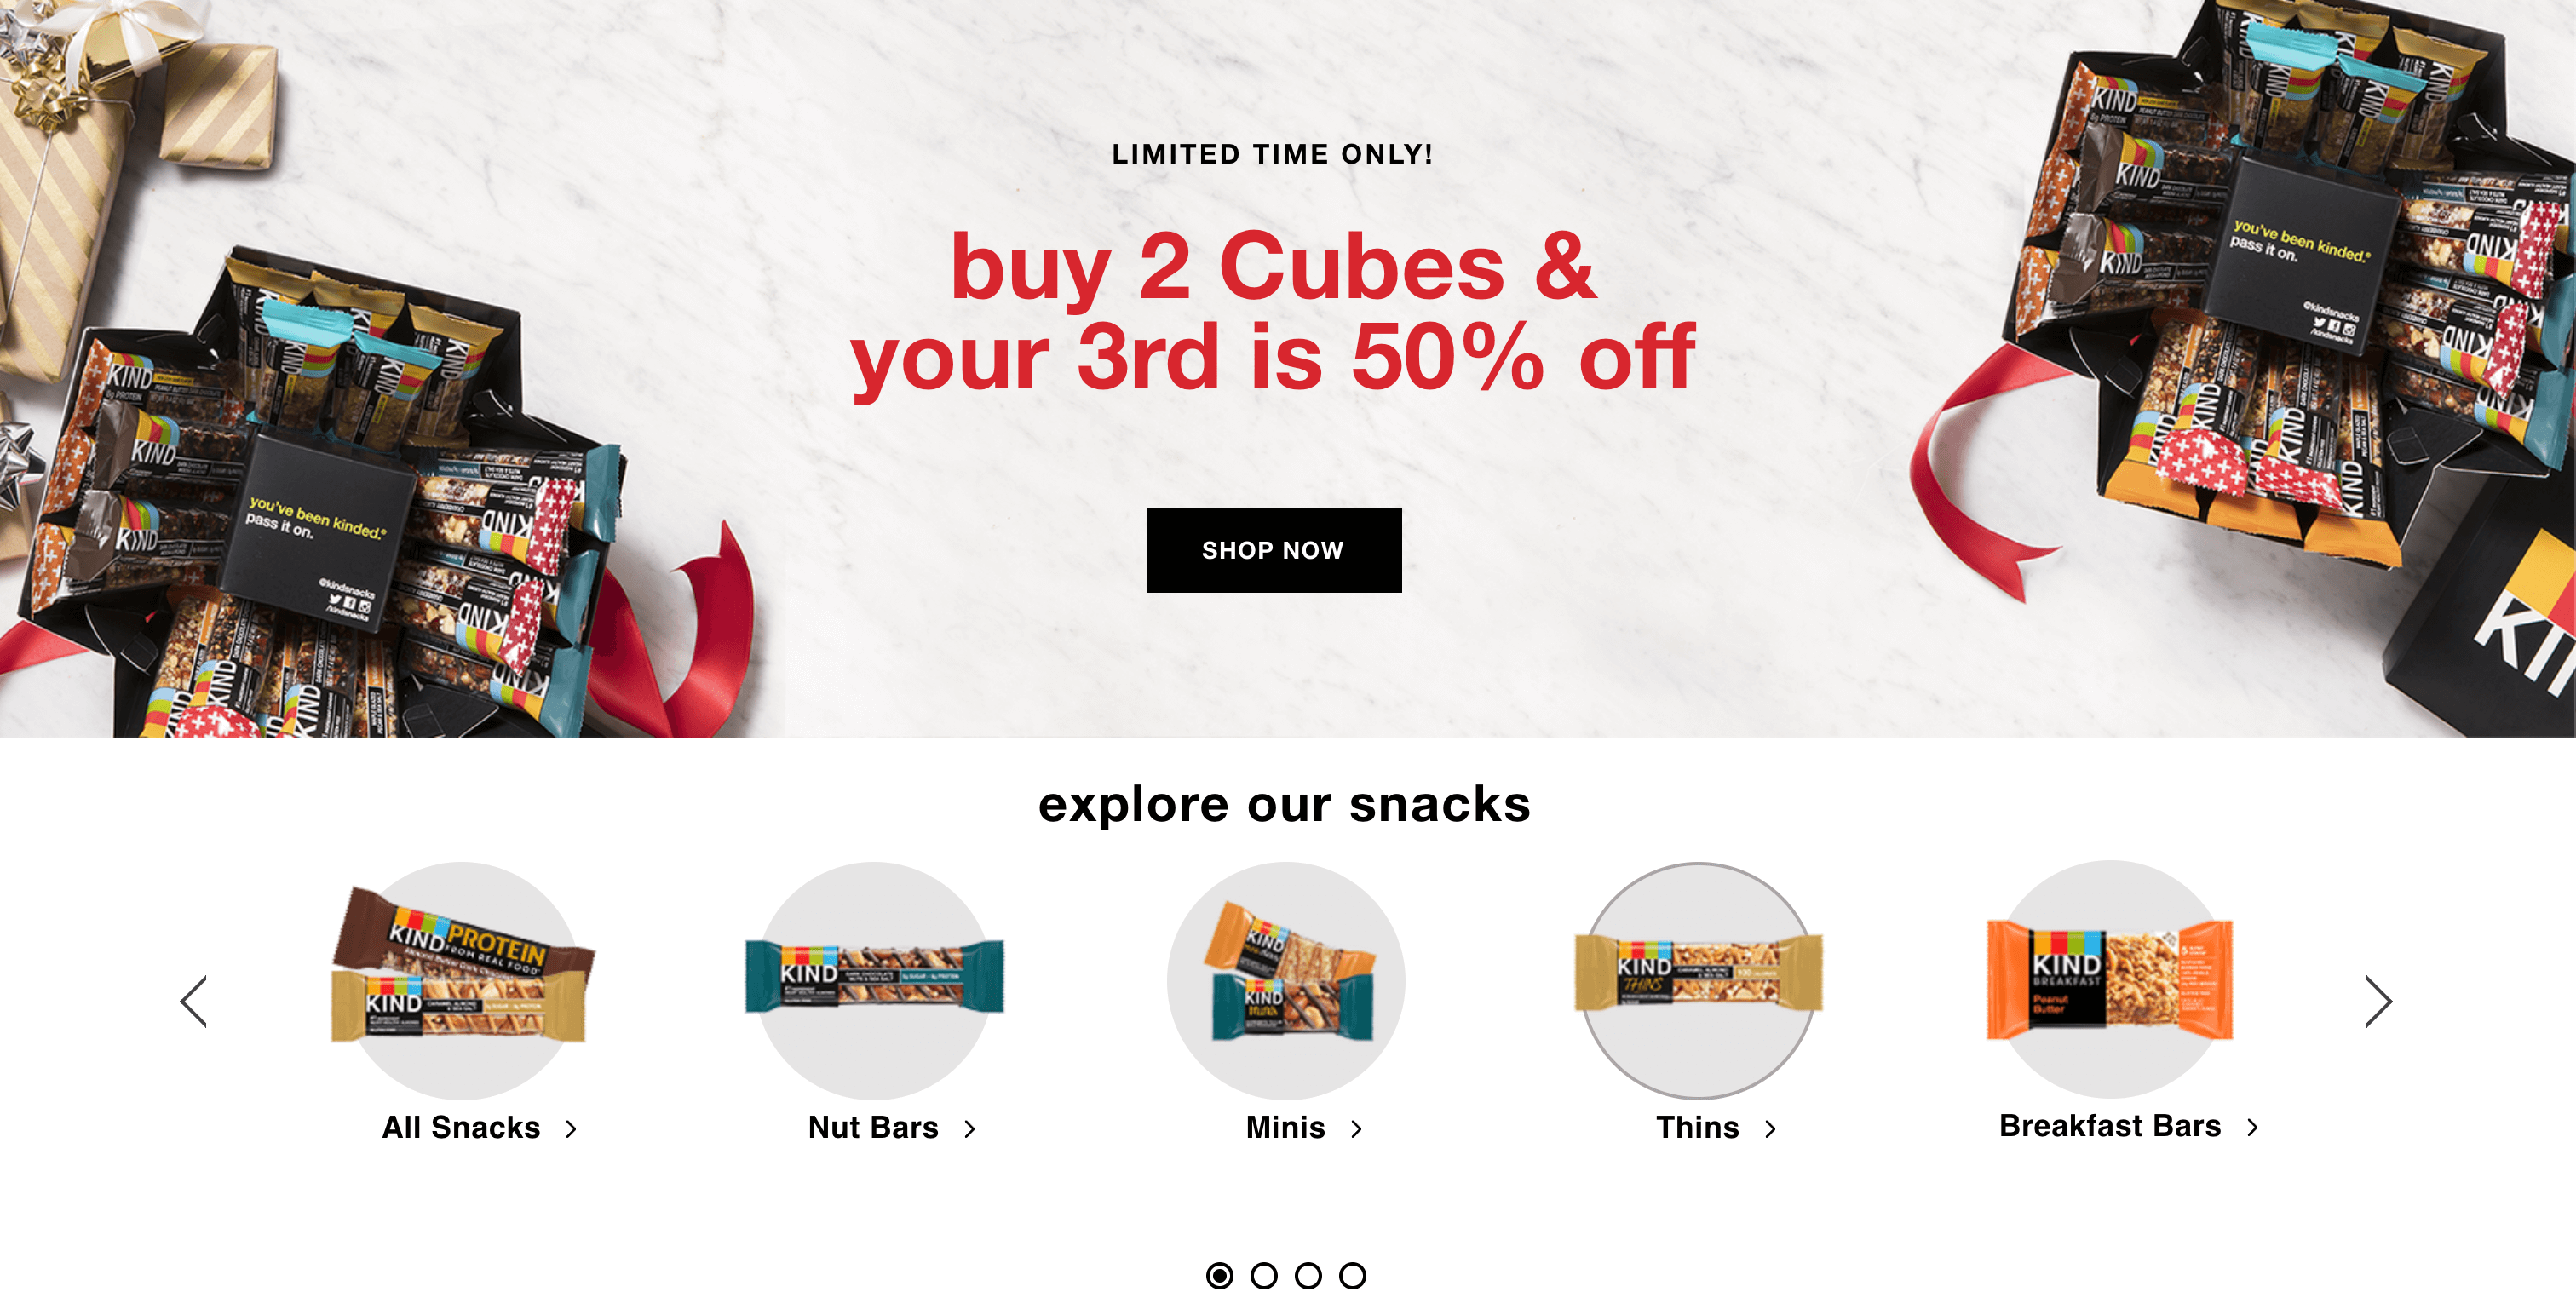 The homepage for KIND snacks